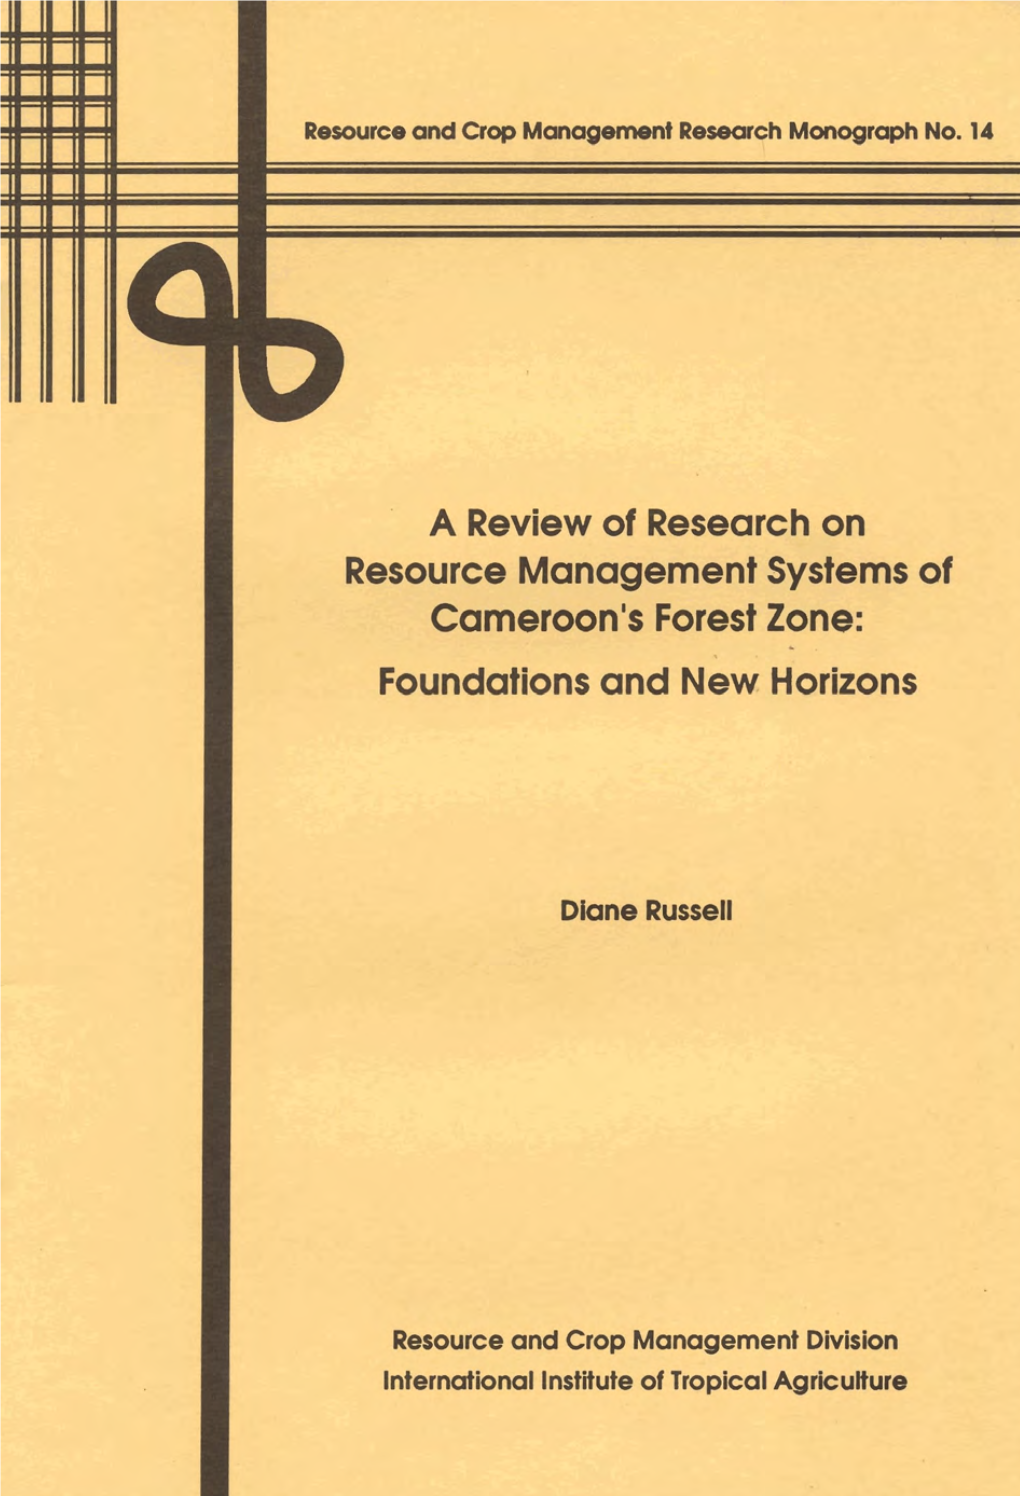 A Review of Research on Resource Management Systems of Cammeroon's Forest Zone